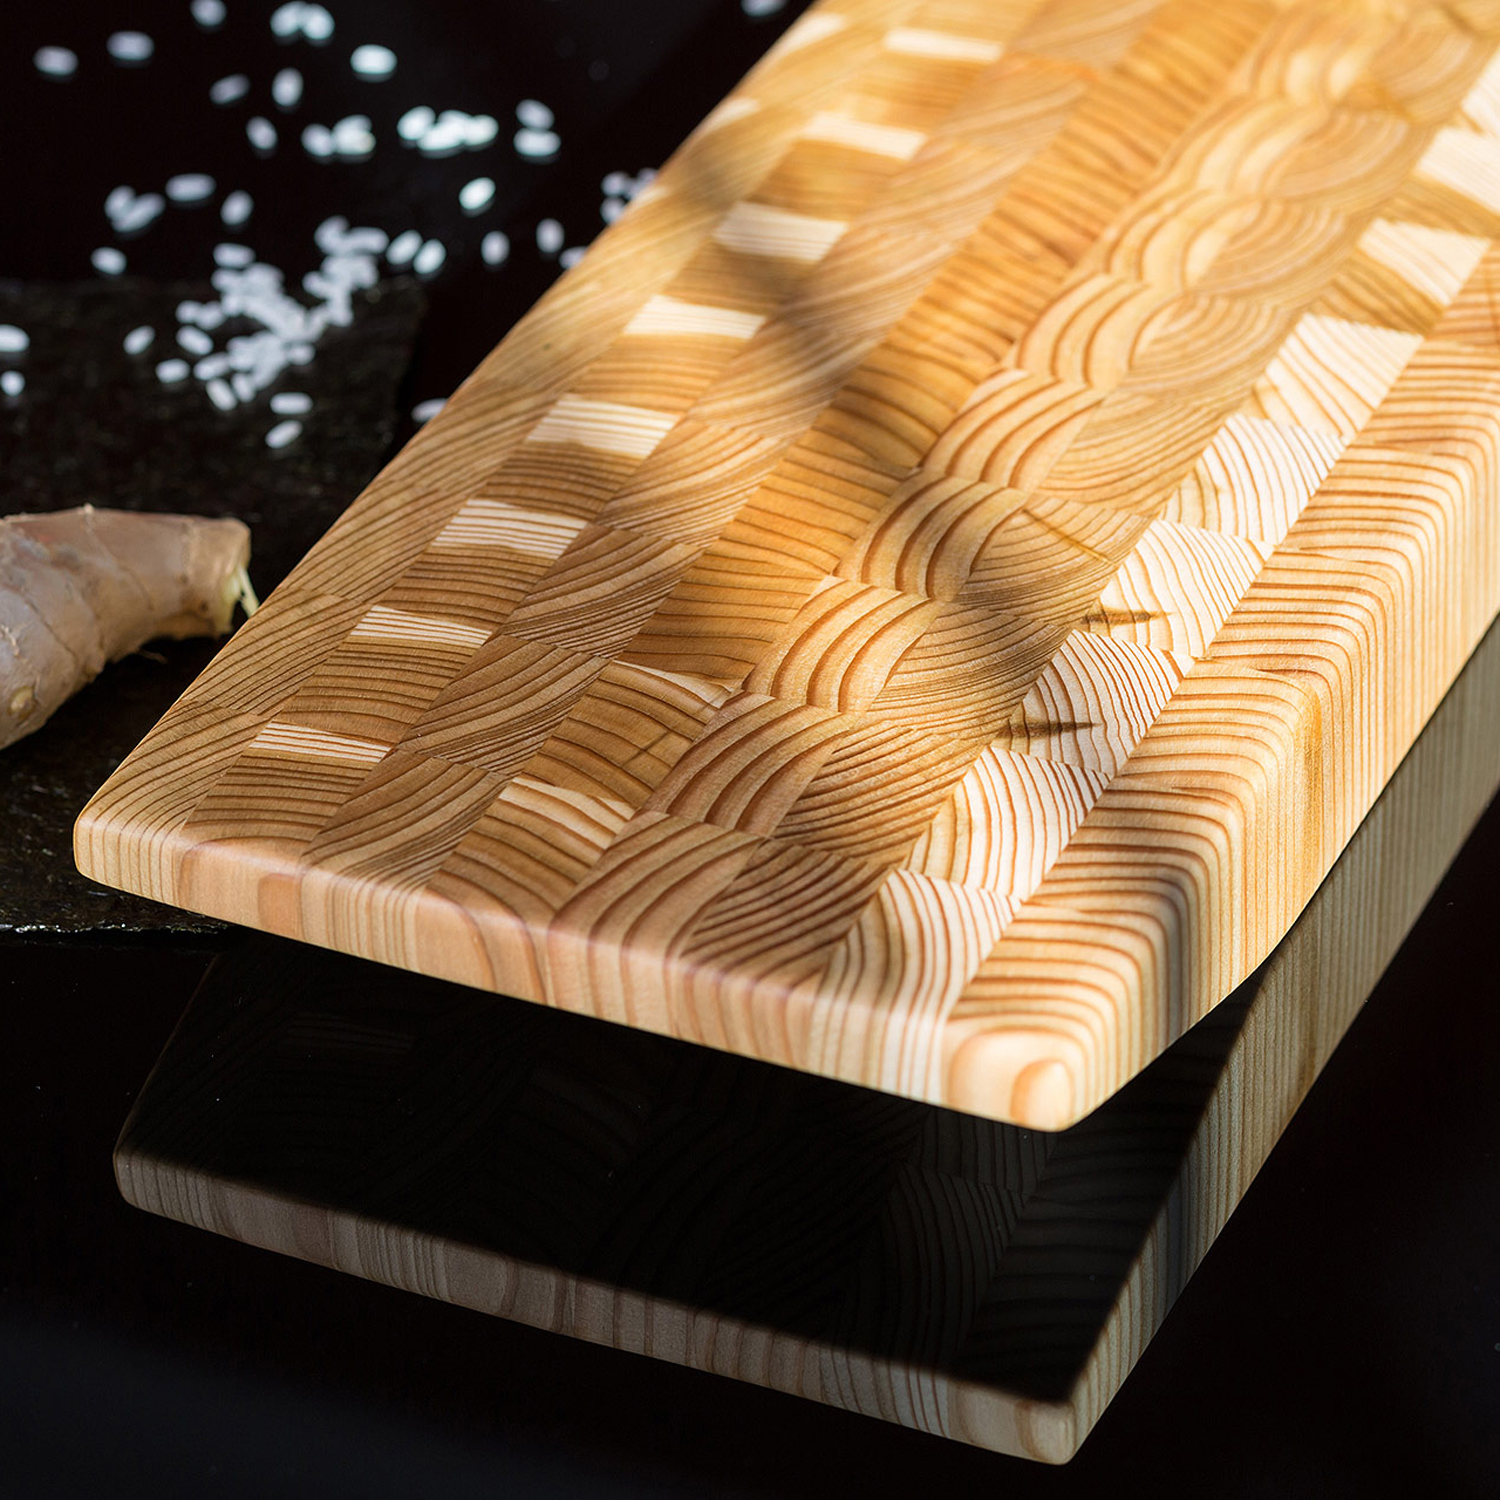 Larch Wood: Ki Small Serving Board Product Image 4 of 5